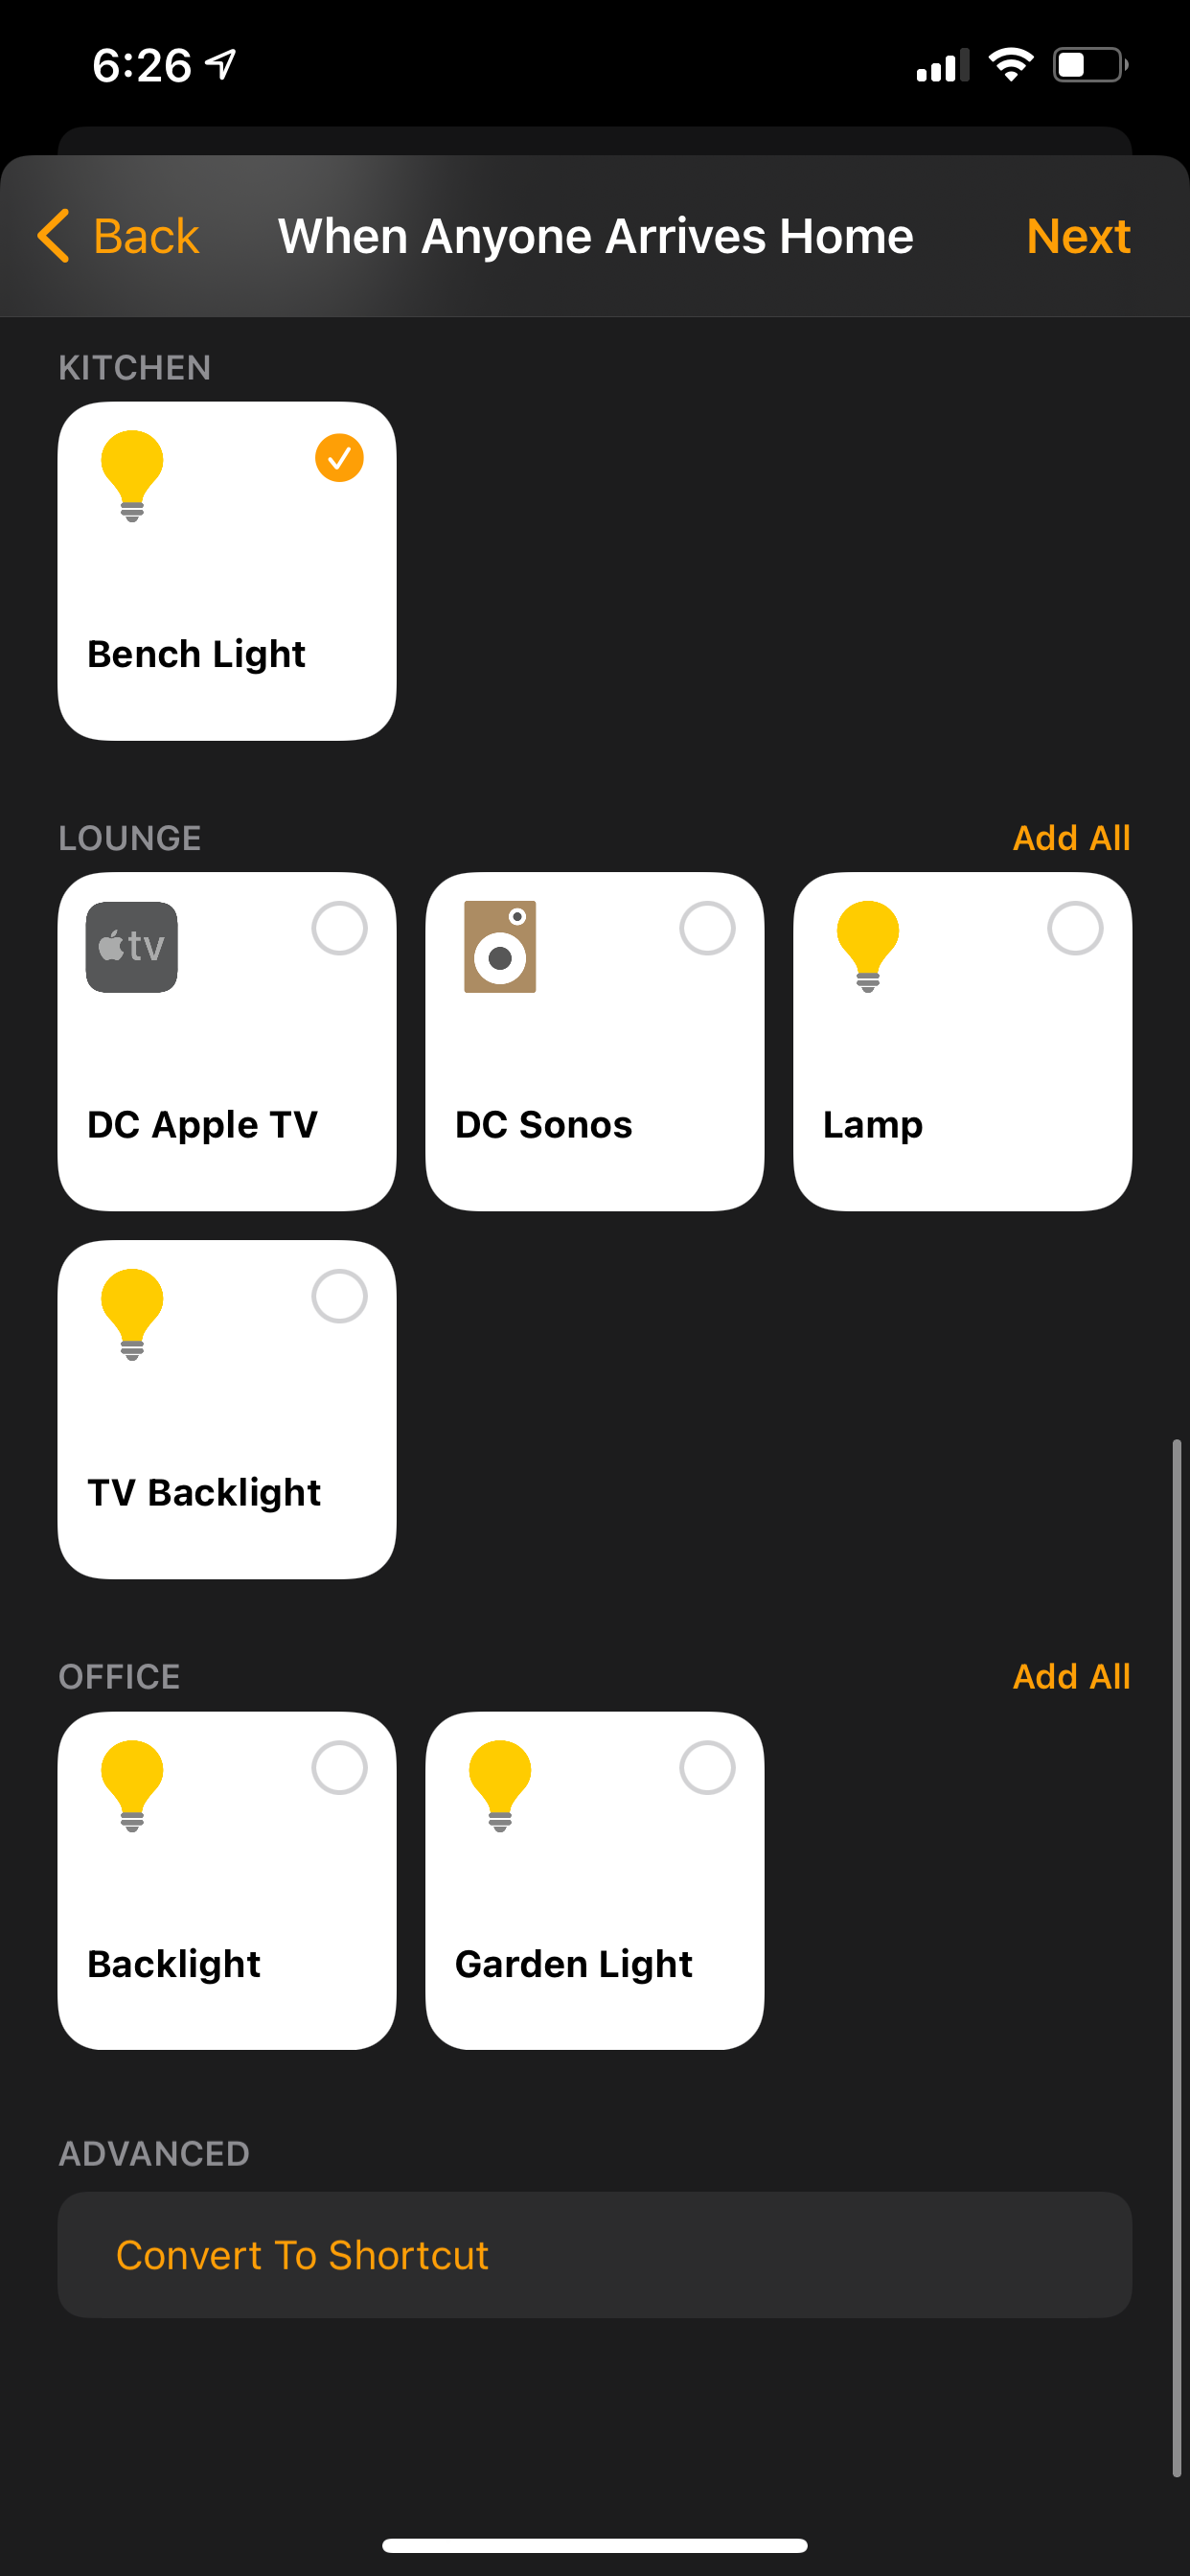 Dyson Hack — Configure Pure Link Fans with Apple HomeKit and Siri Shortcuts  support | by Dale Clifford | Internet Stack | Medium